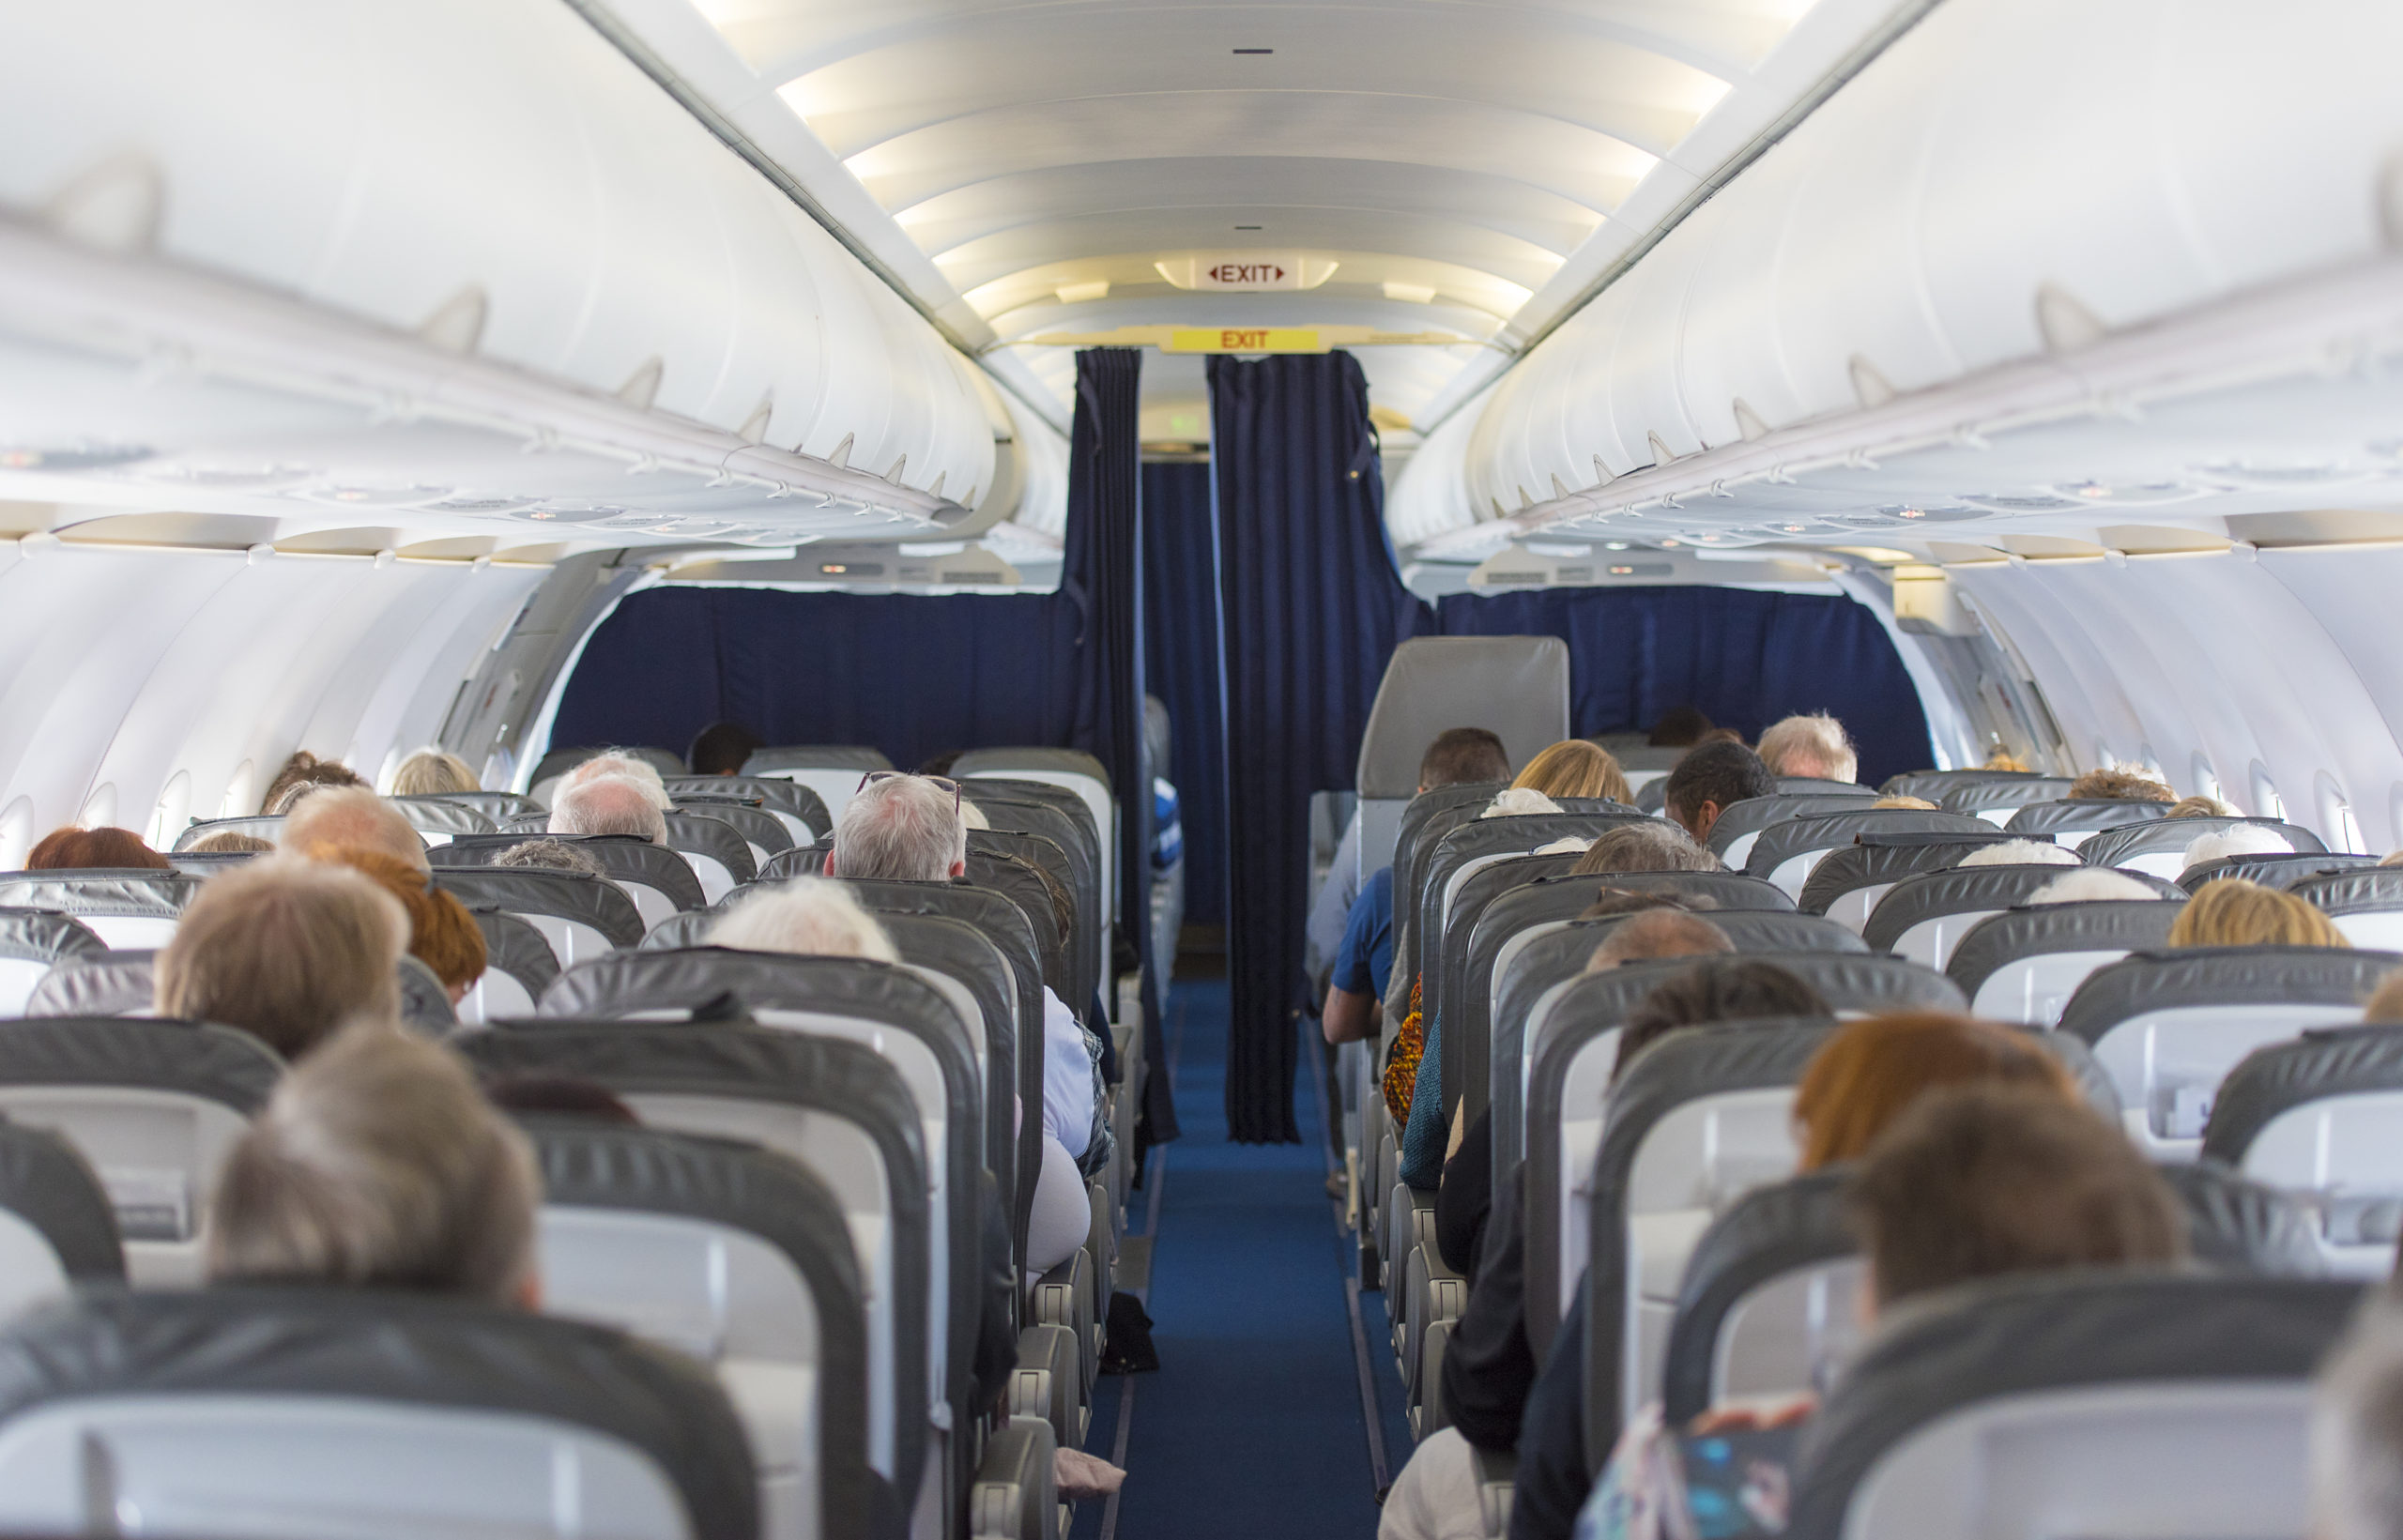 A commercial aircraft cabin is full of passengers sitting as they wait to be flown to their destination.